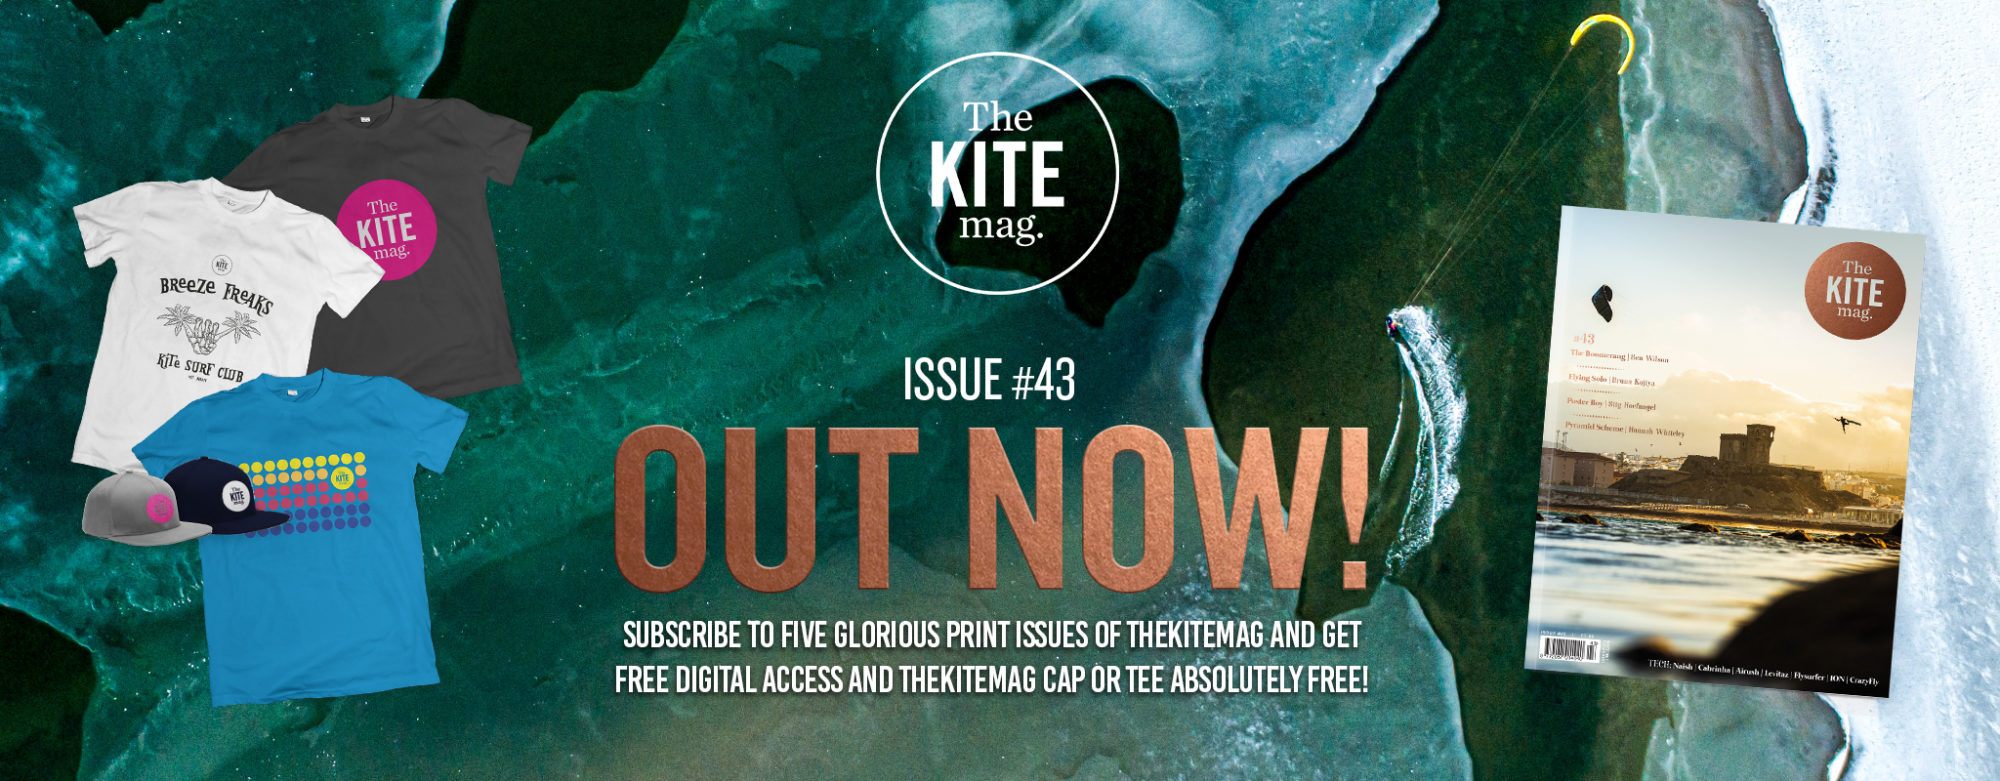 TKM43 subs page img copy scaled - Costa del Kite